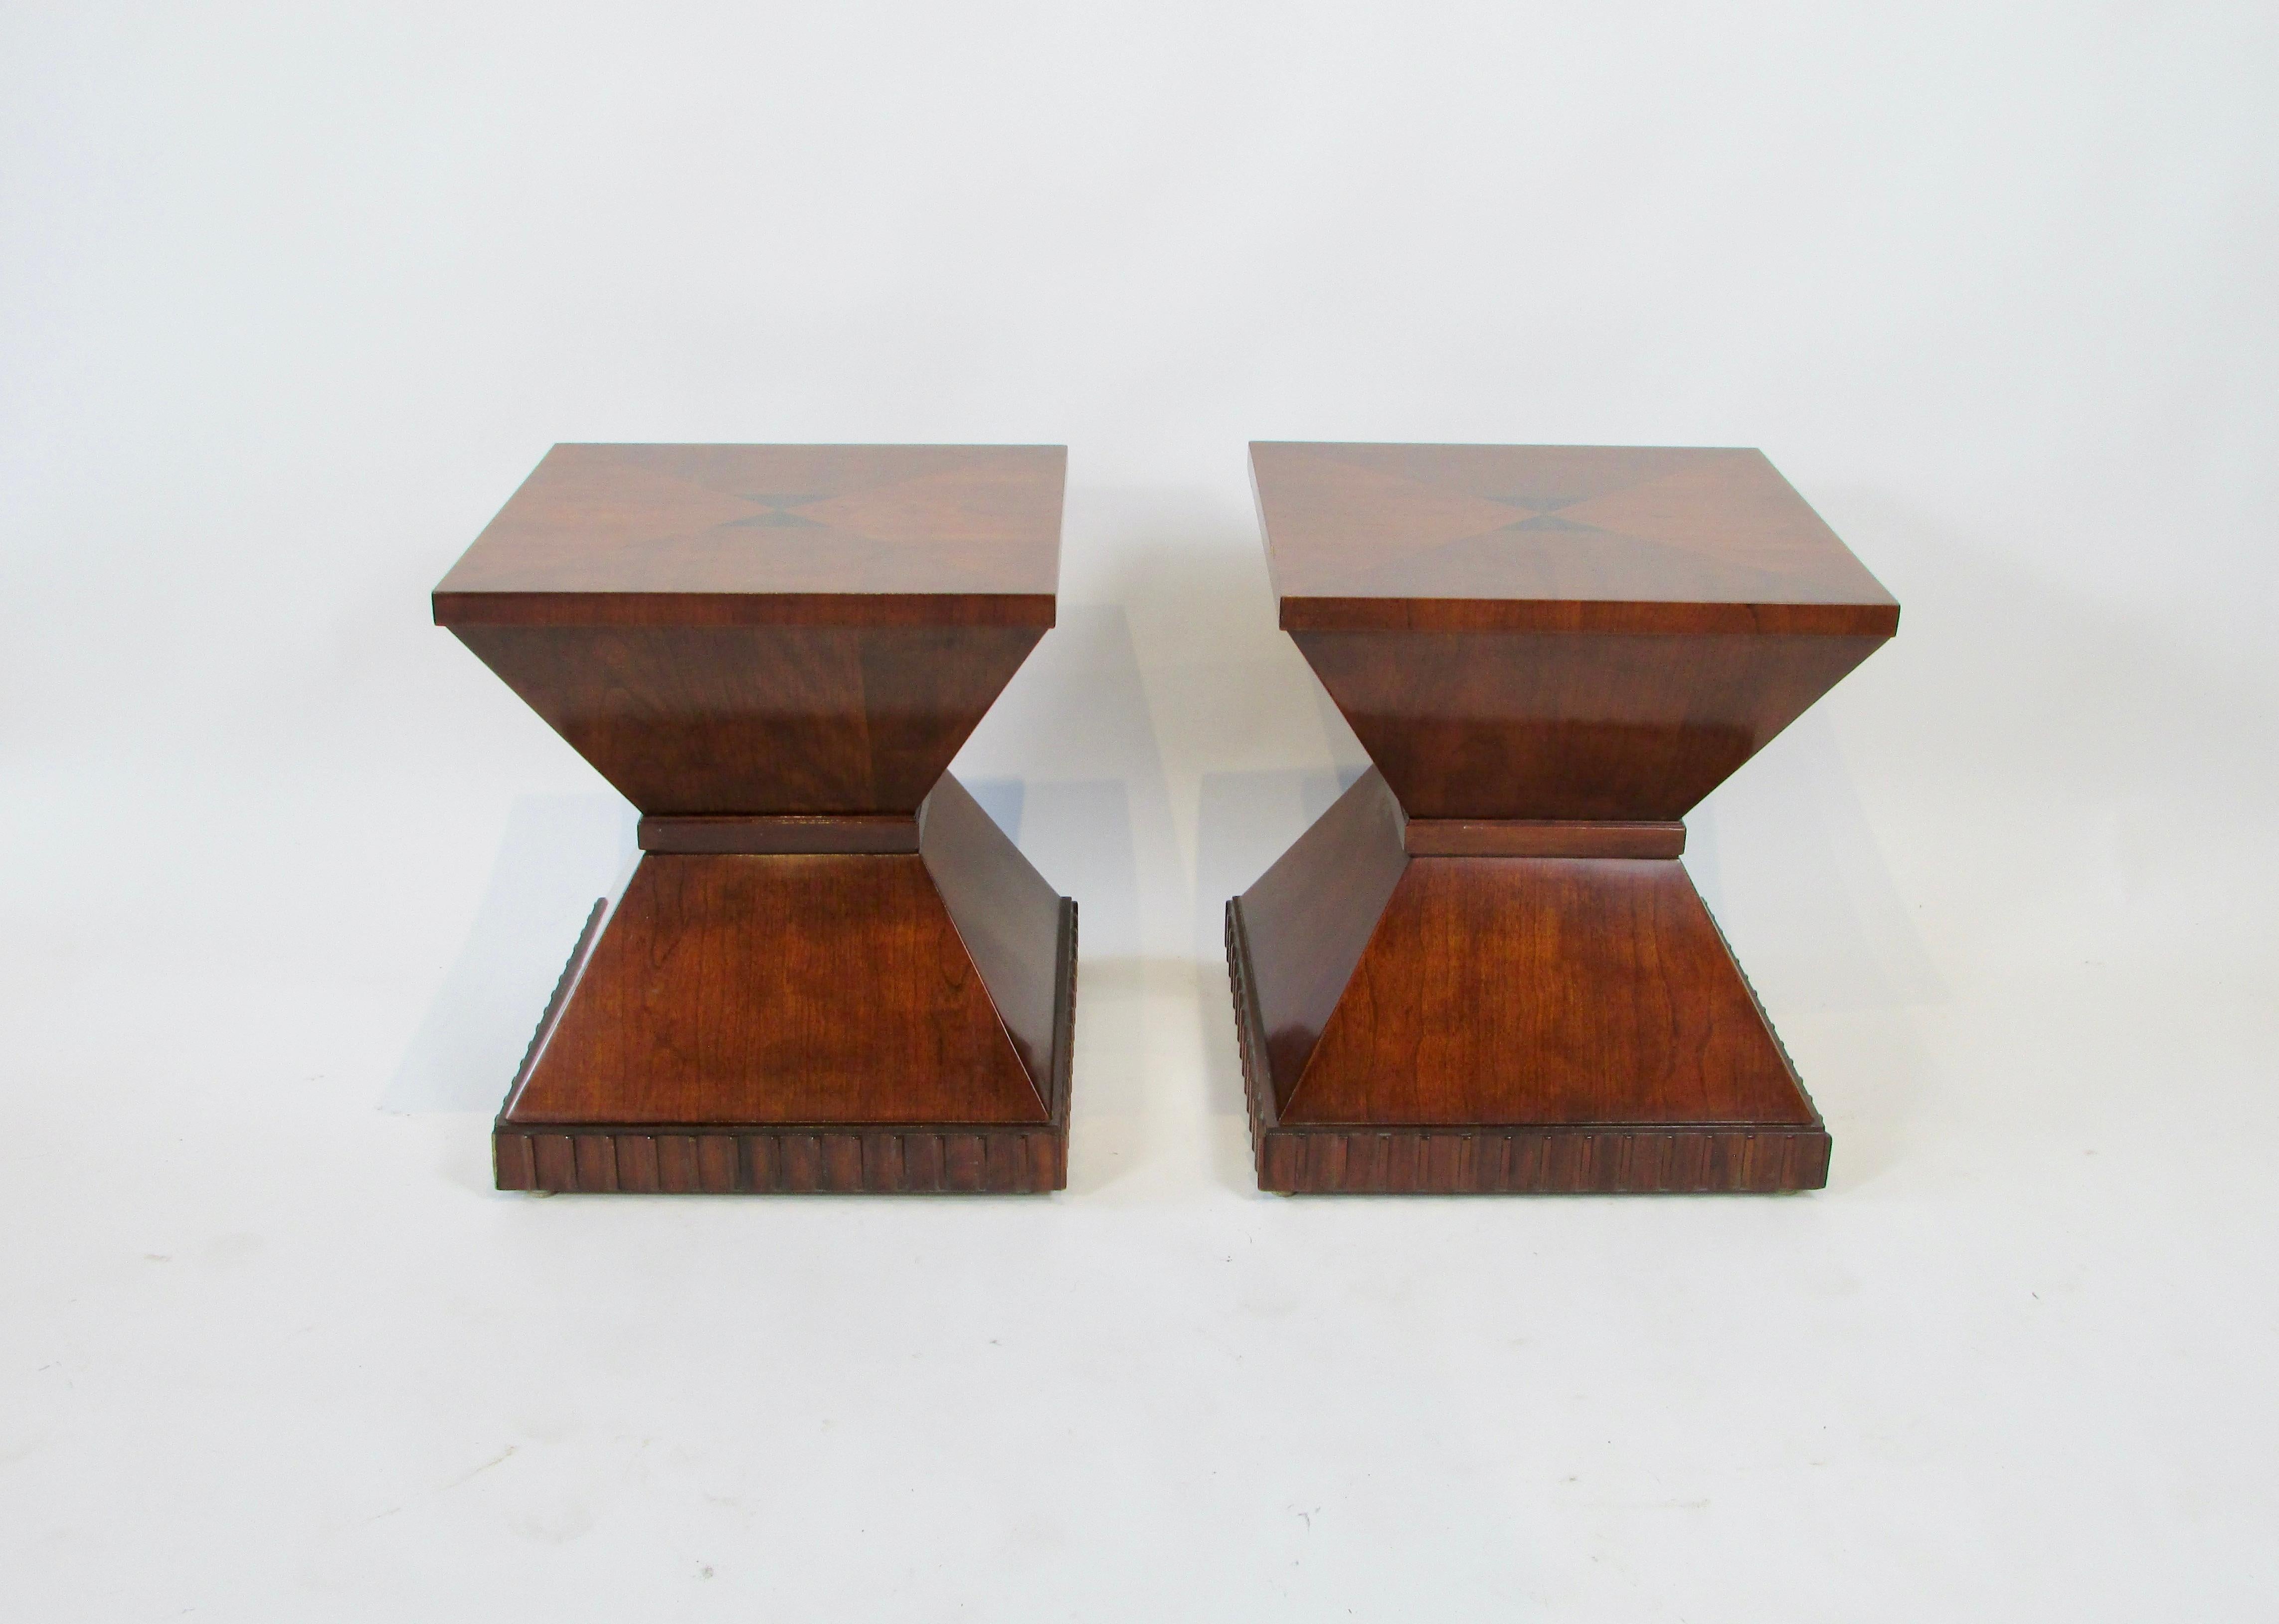 Pair of neoclassic  styled tables by Henredon Square for with pinched waist sit on scalloped edge base . Marquetry tops show inlaid Rosewood 